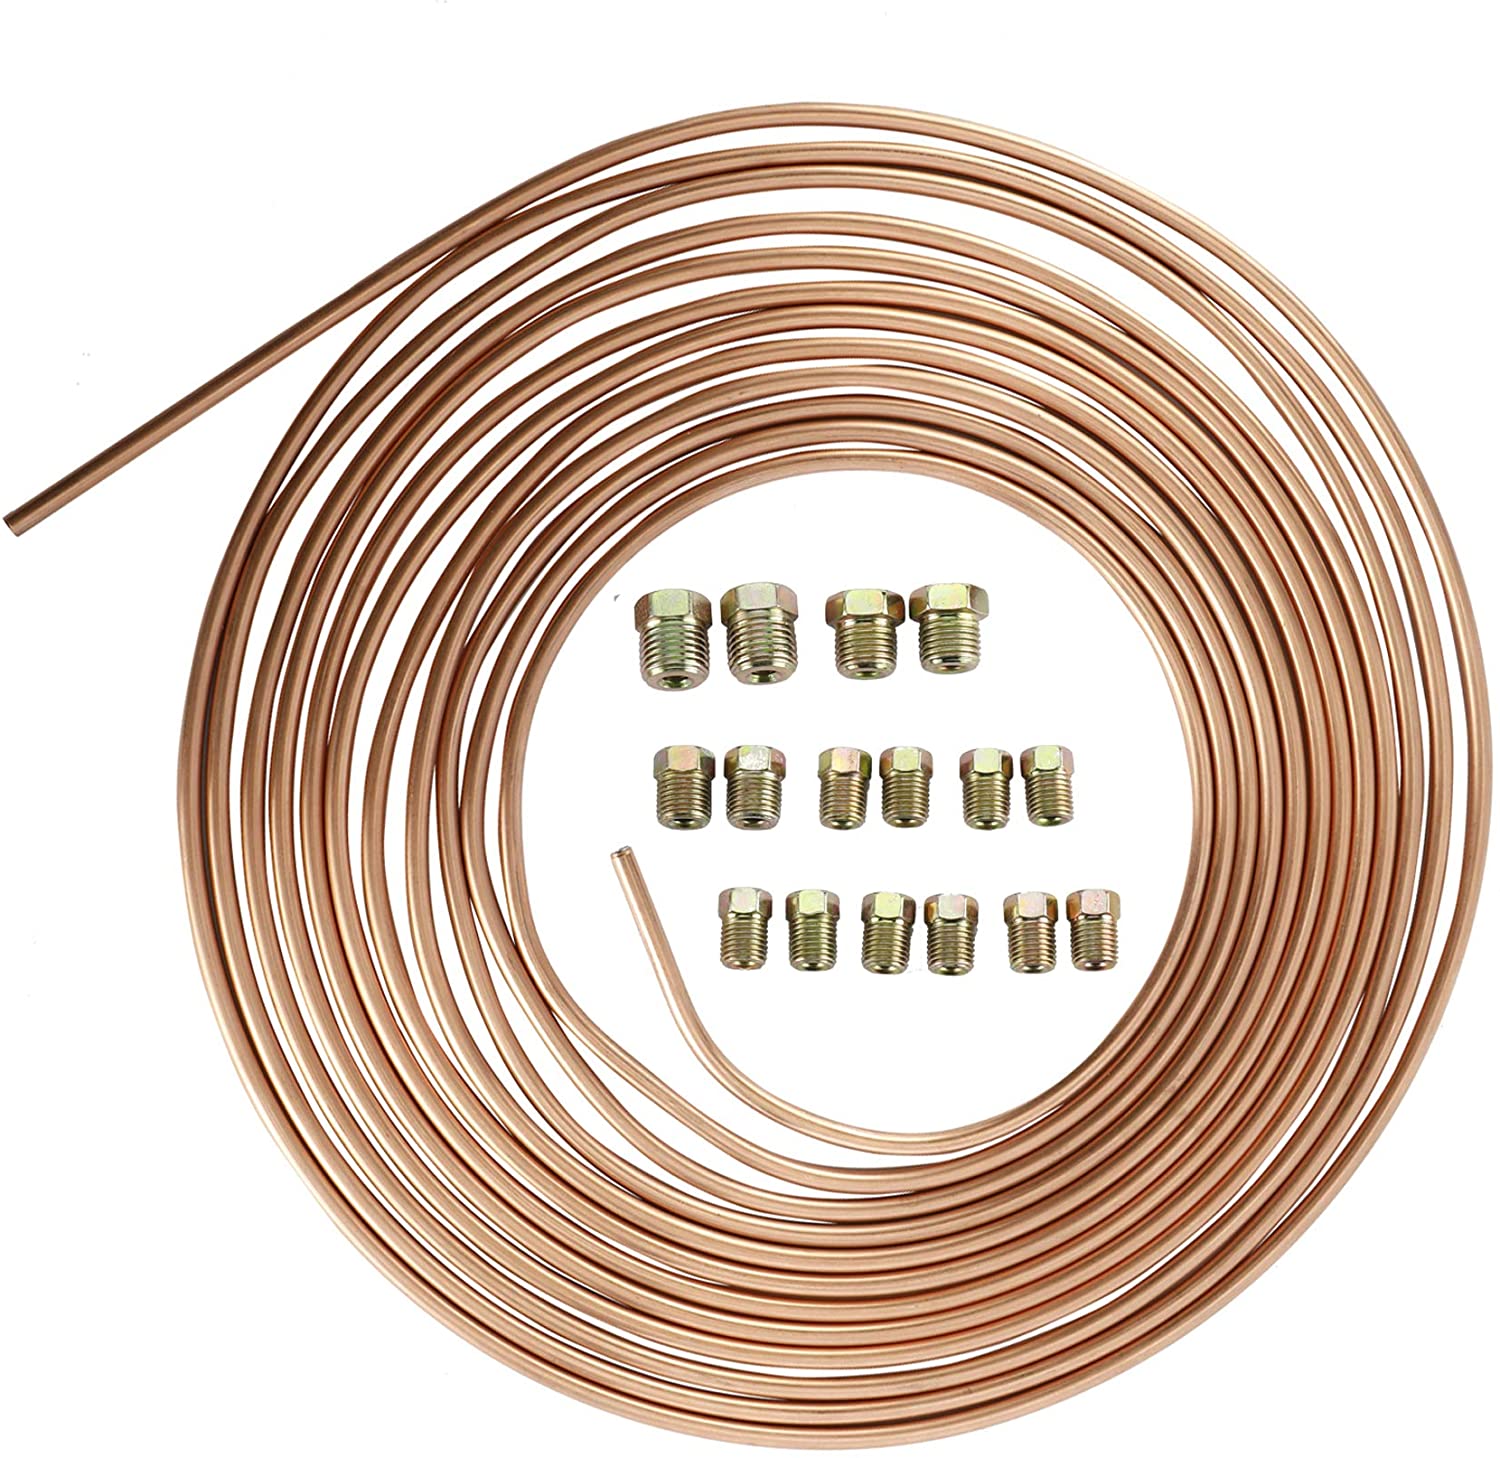 AuInLand 25 Ft. of 3/16 in Brake Line Tubing Kit, Copper-Coated Iron Break Line, Flexible Brake Coil Roll with 16 Fittings